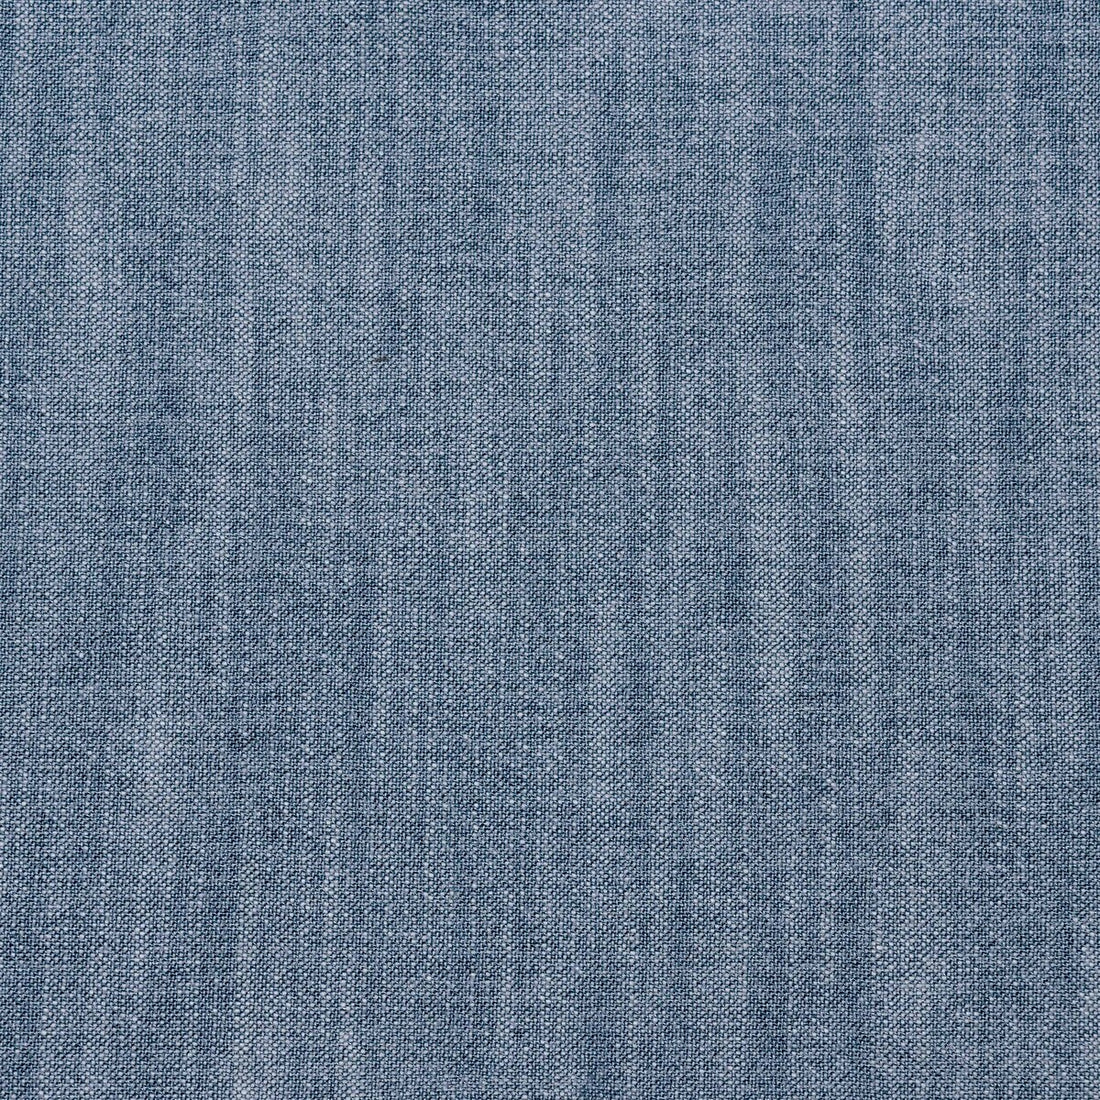 Uganda fabric in gris color - pattern GDT5389.10.0 - by Gaston y Daniela in the Gaston Africalia collection